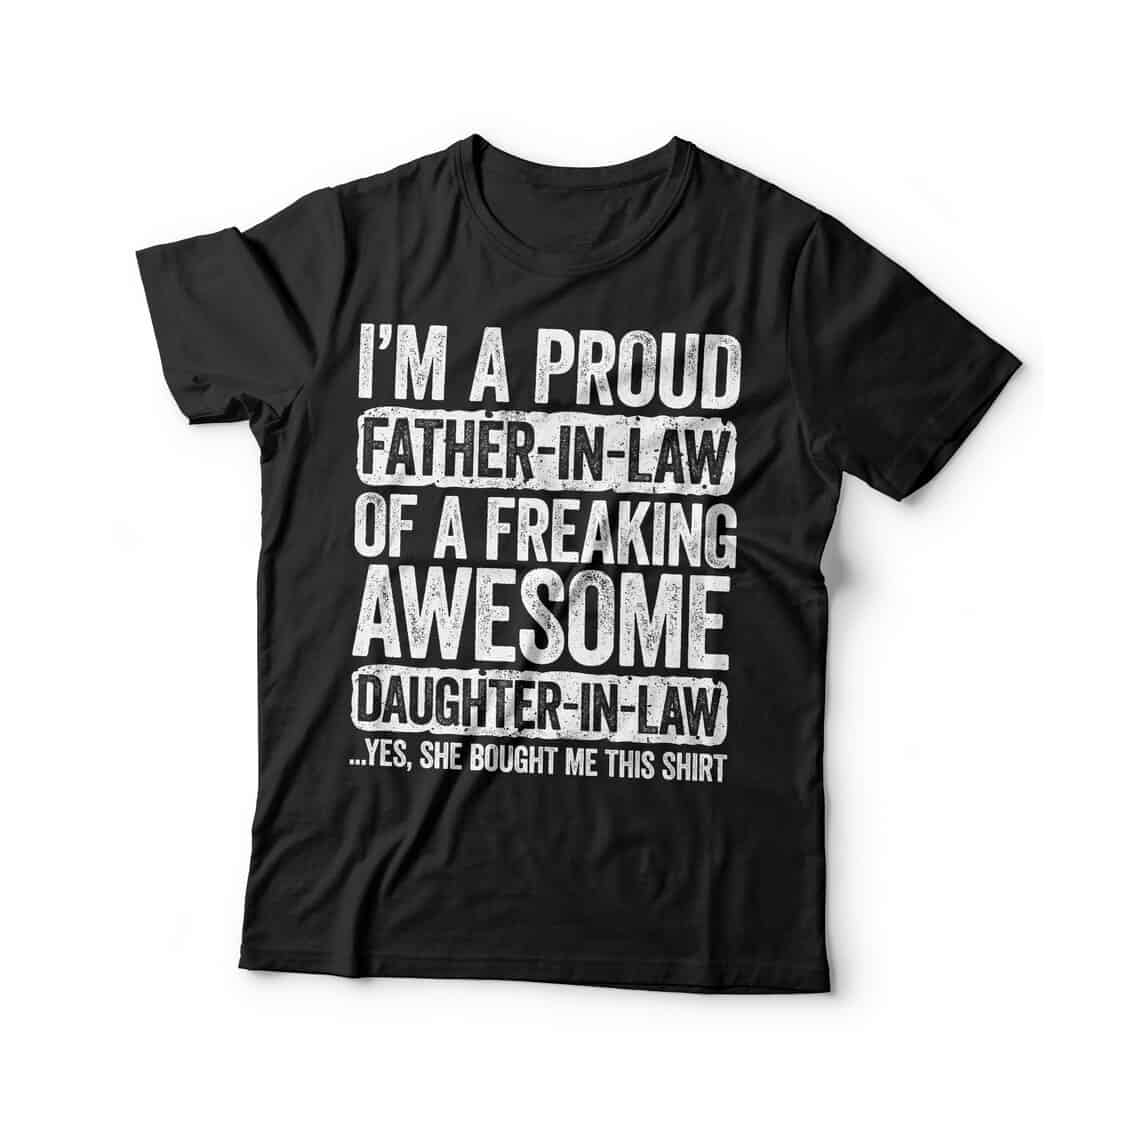 Shirt that says "I'm a proud father-in-law a freaking awesome daughter-in-law... yes she bought me this shirt"